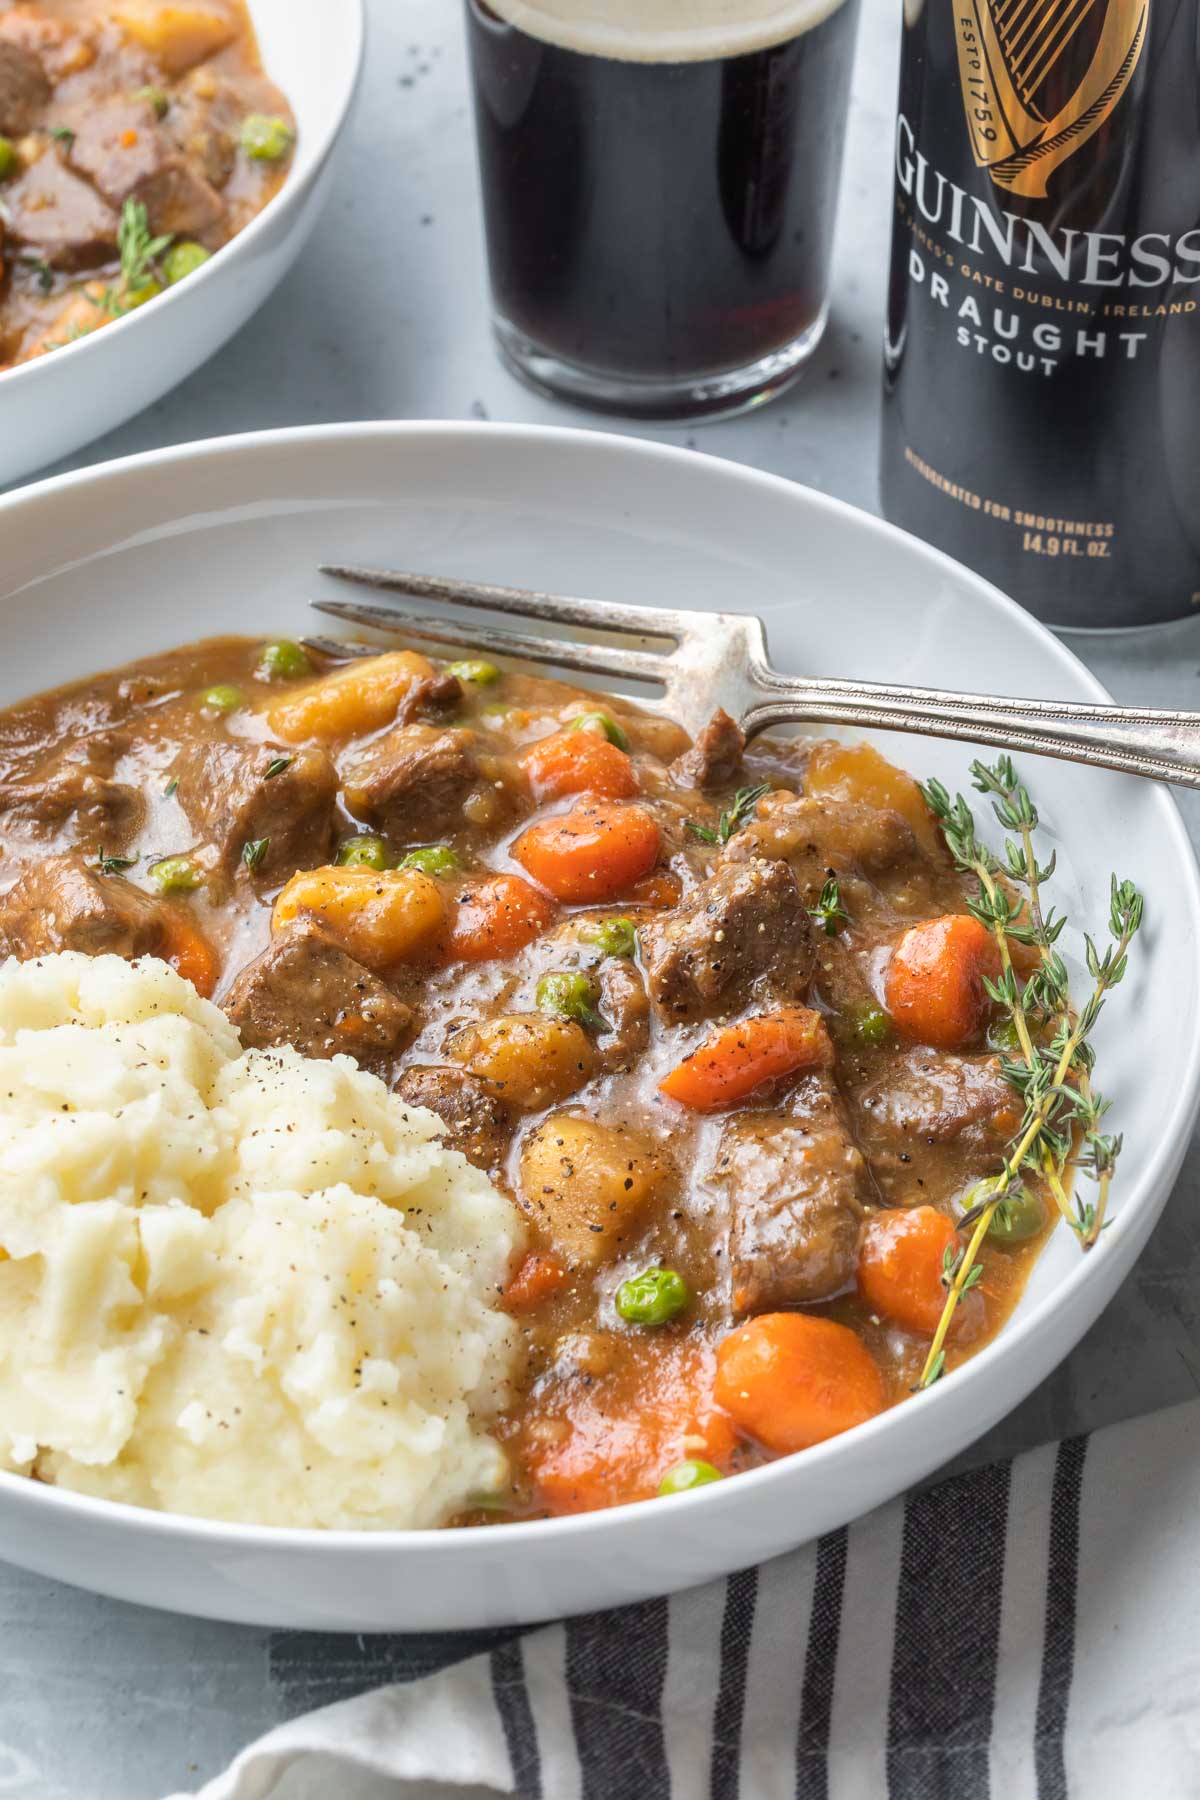 irish beef stew in a bowl with mashed potatoes garnished with fresh thyme